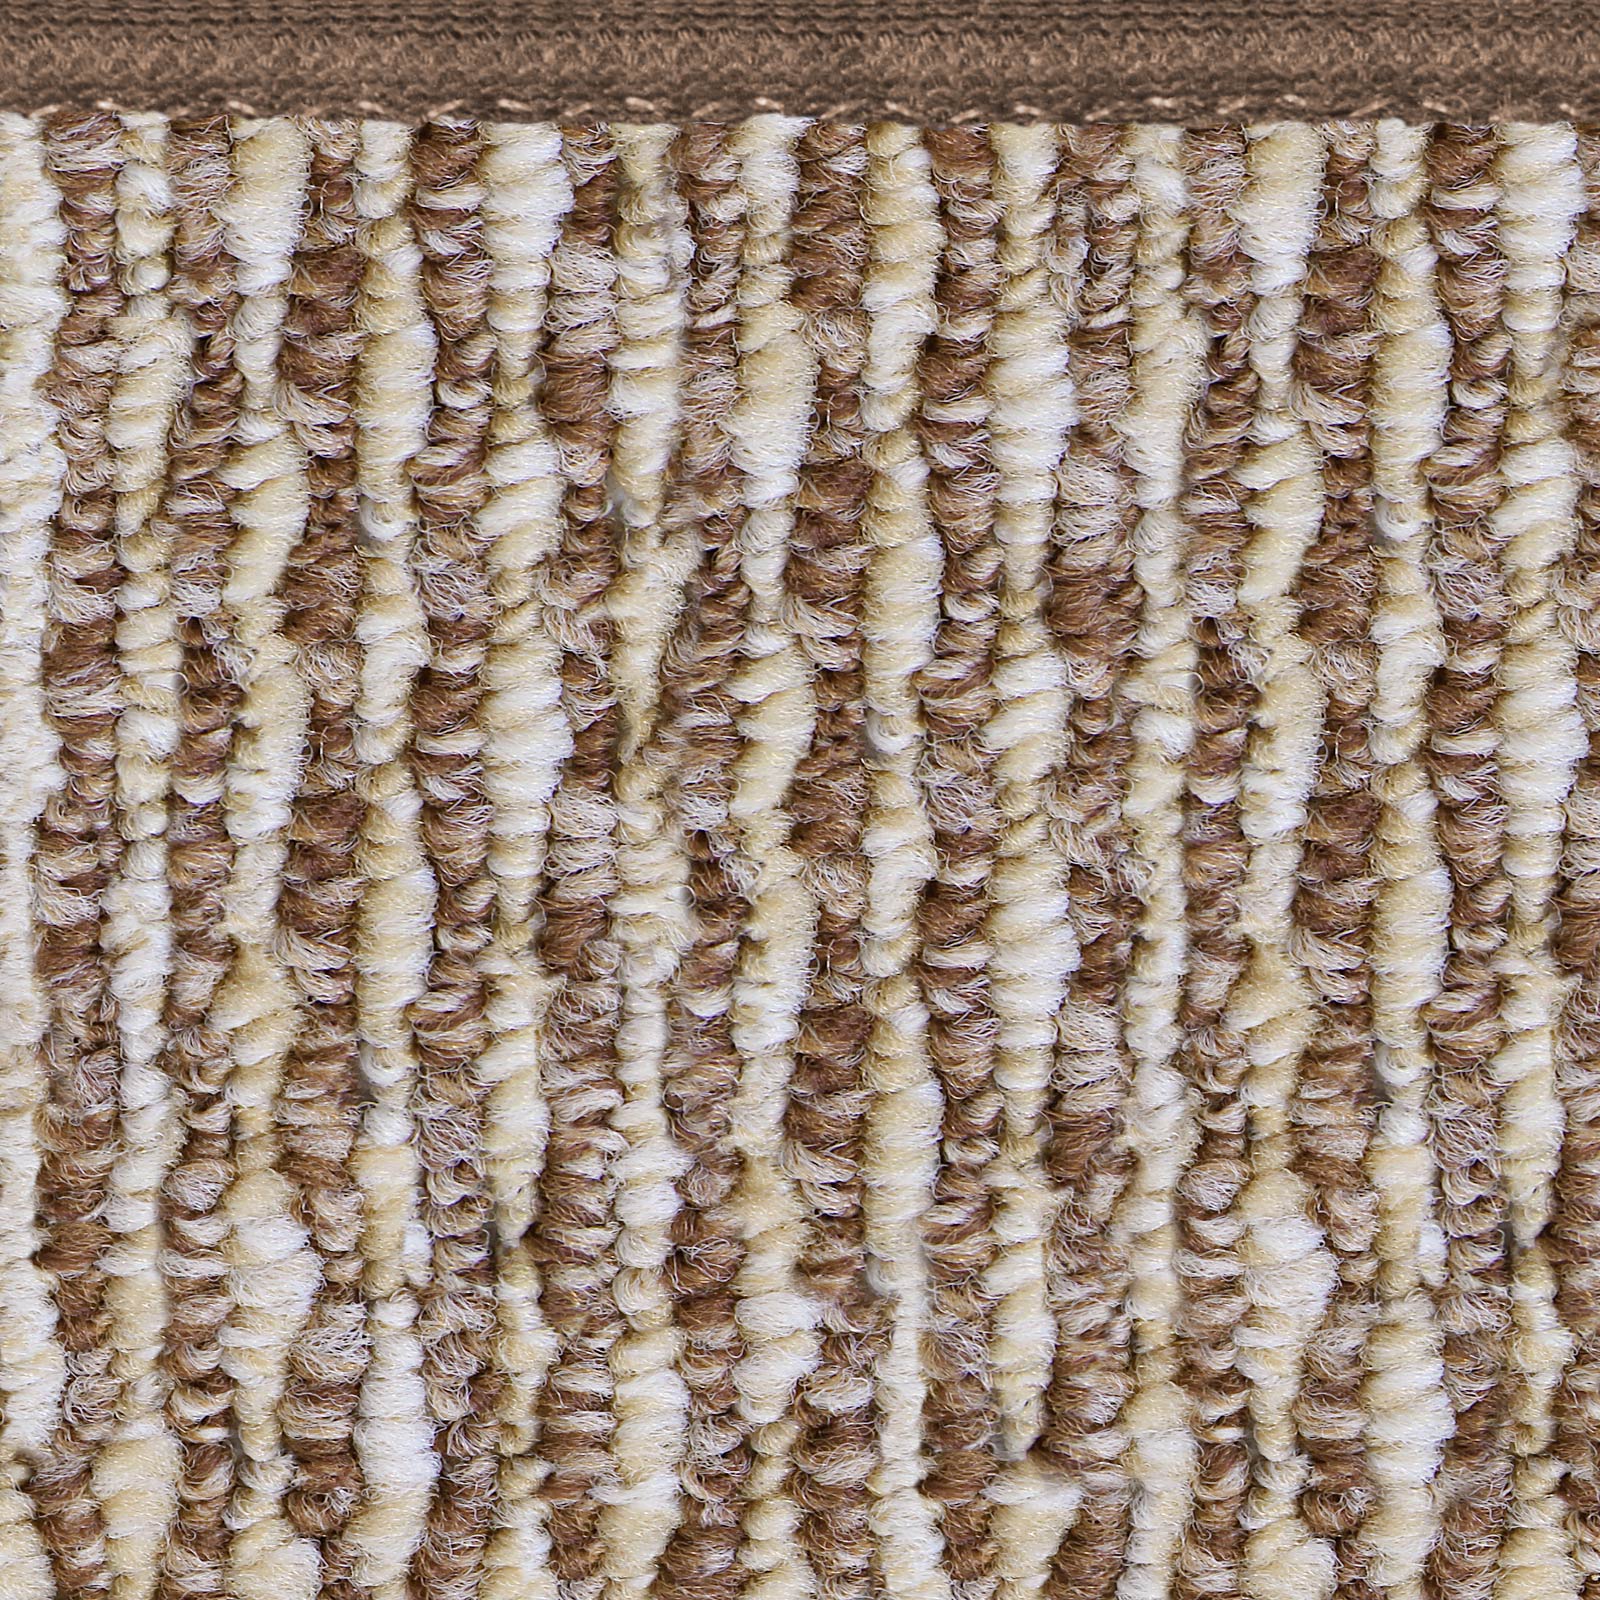 House, Home and More Skid-resistant Carpet Runner - Praline Brown - 24 Ft. X 36 In.